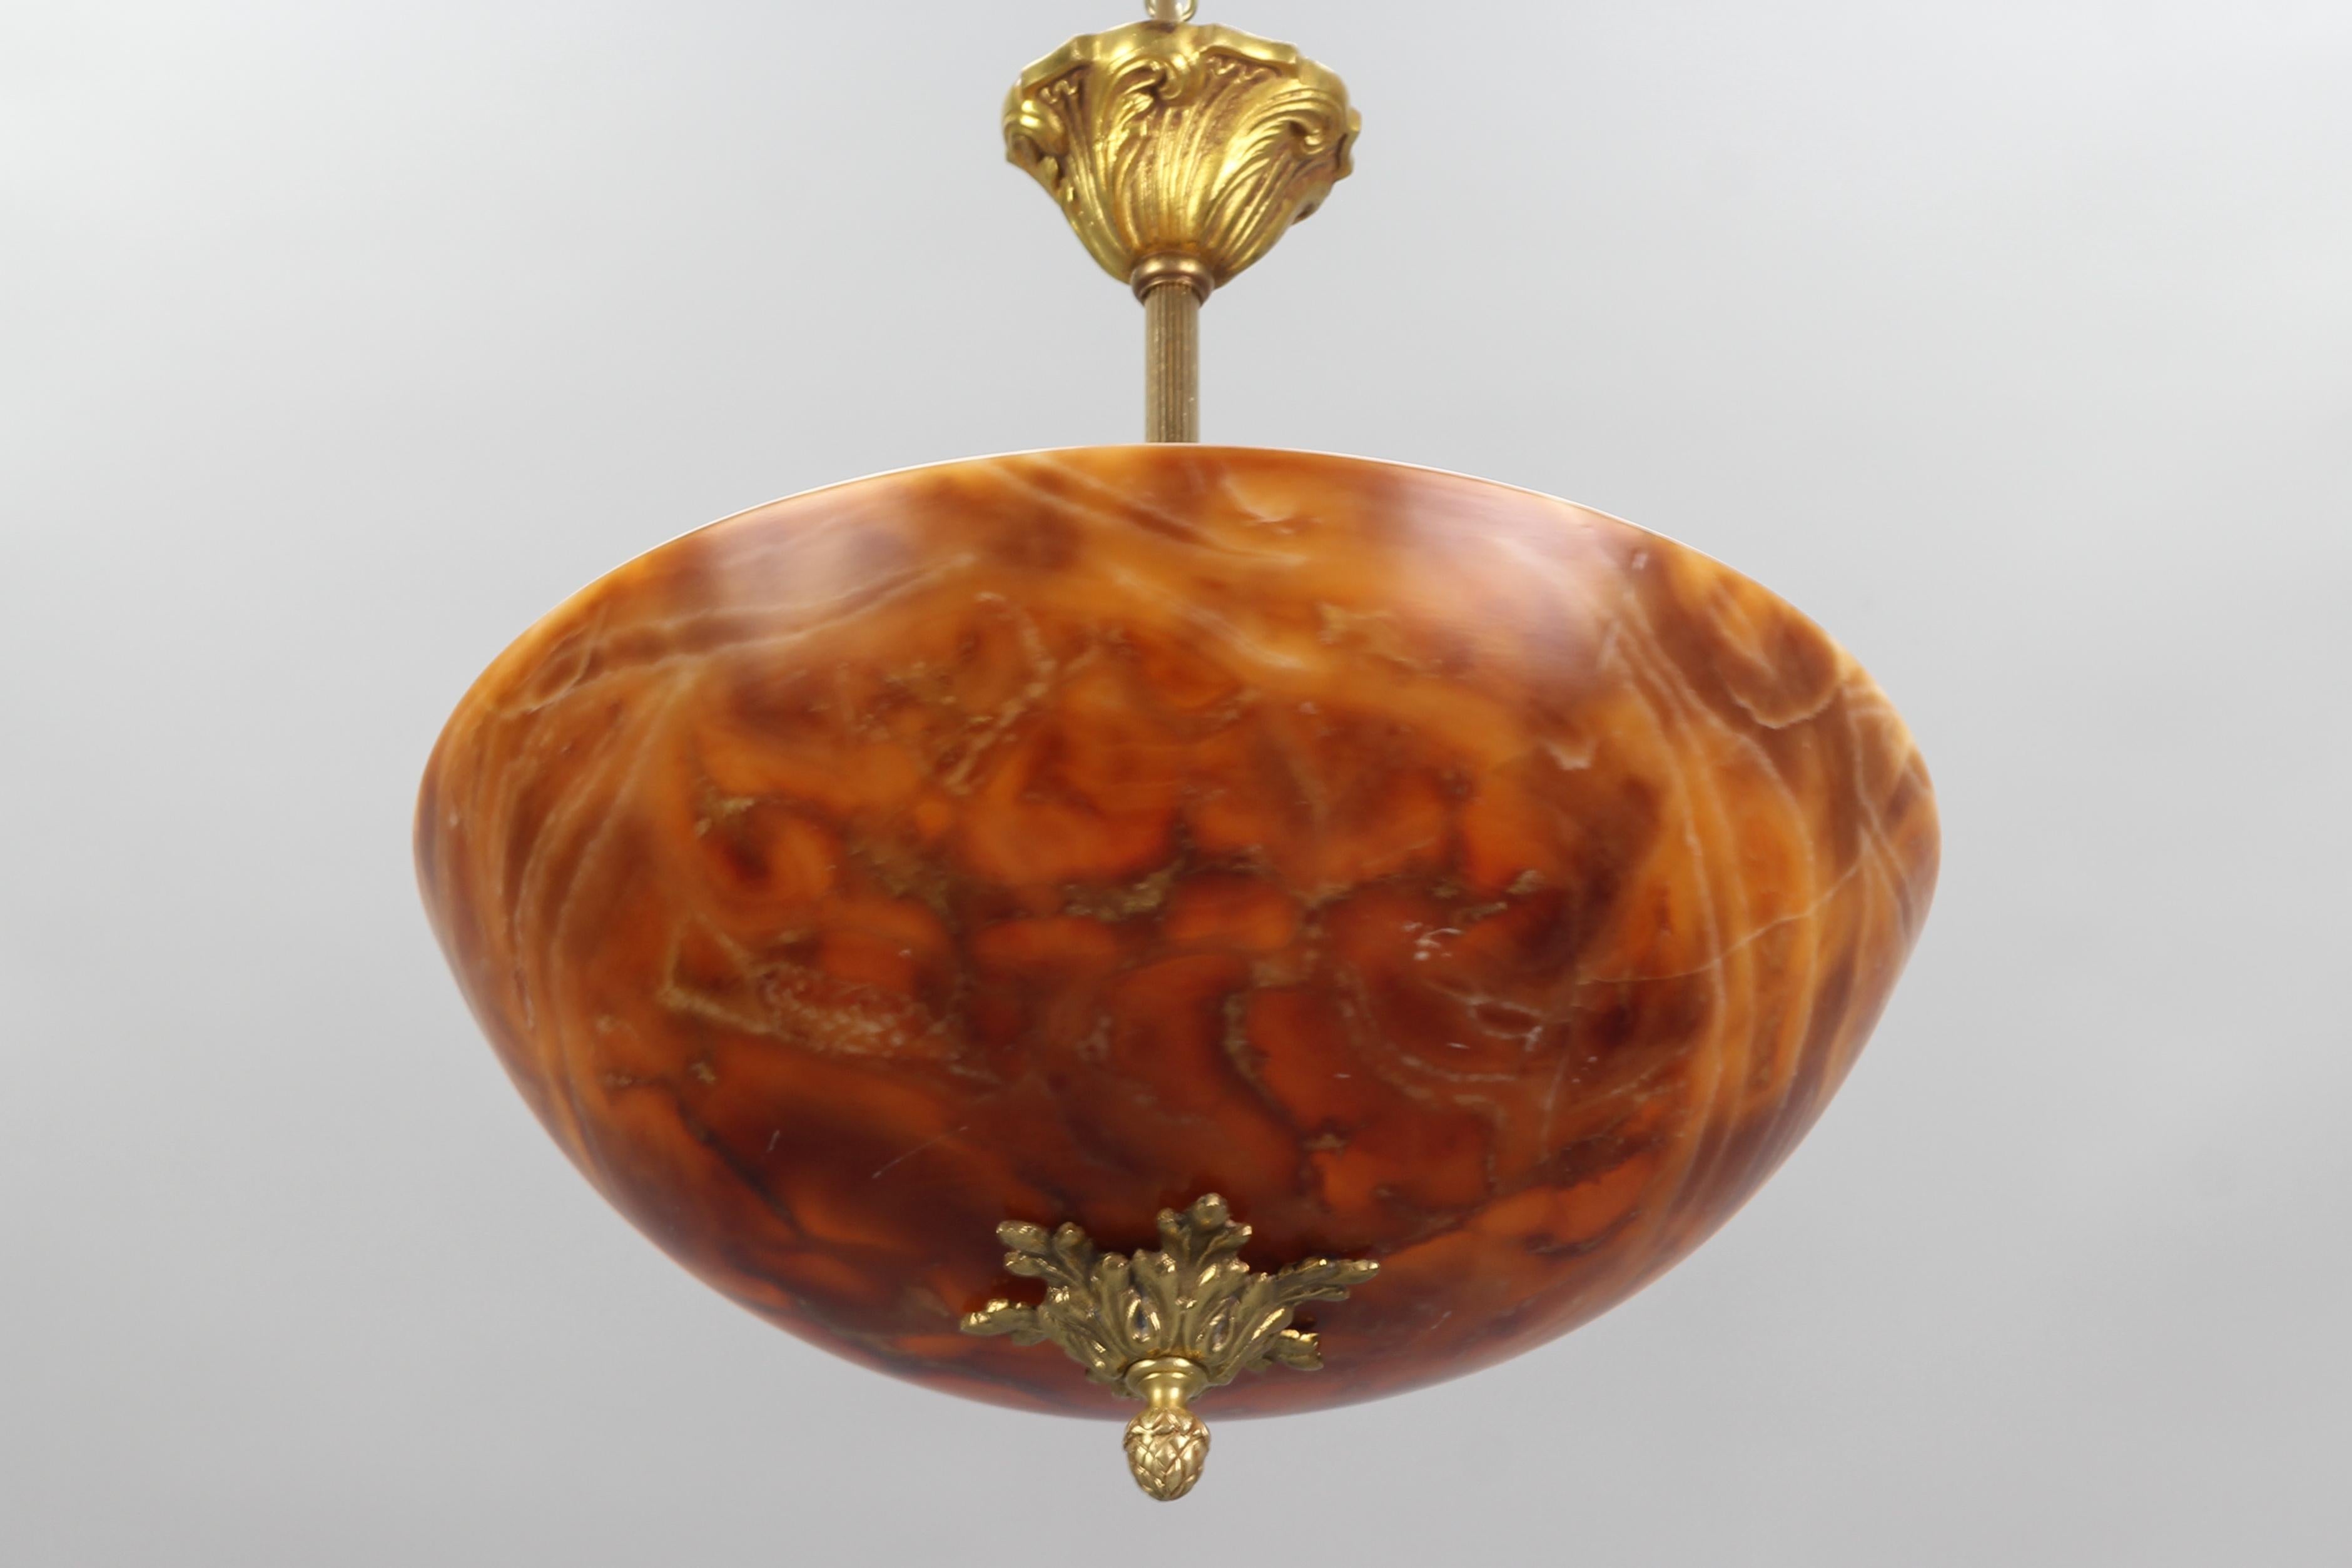 Beautiful French Neoclassical style pendant light fixture from the 1950s. This adorable pendant light features an orange alabaster shade and an ornate central bronze finial. The light shining through the alabaster is warm and atmospheric and it